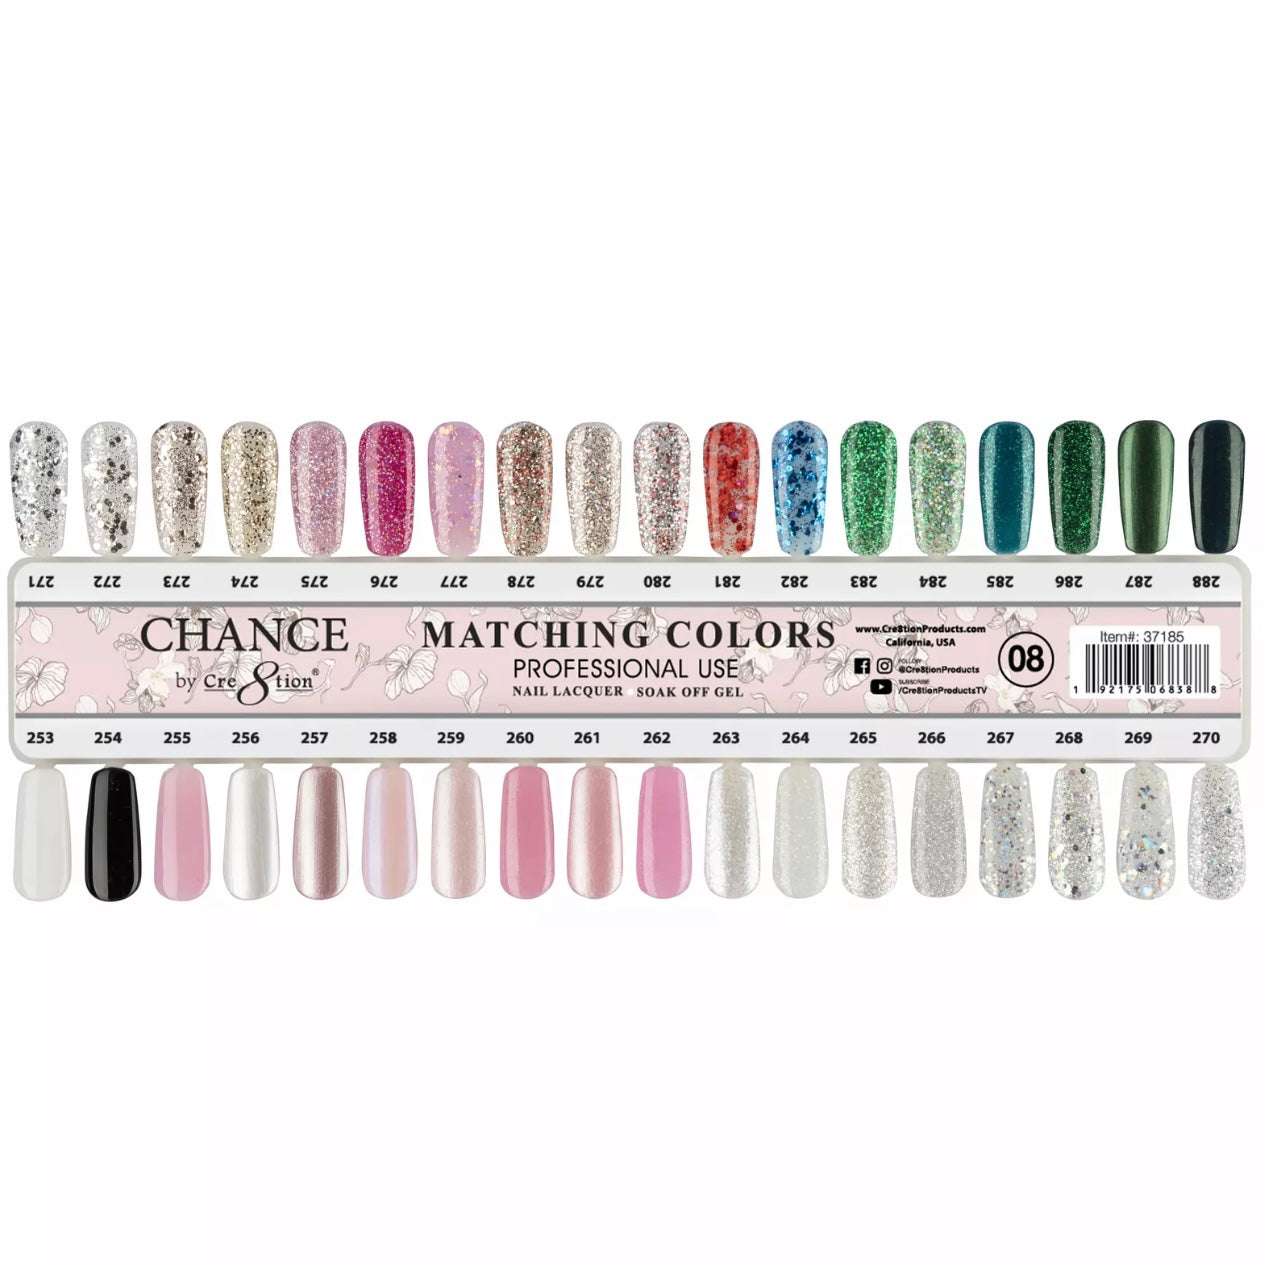 Cre8tion Chance Gel / Lacquer Duo Colors Set #8 (Glitter & Pearl Shades) # 253 - 288